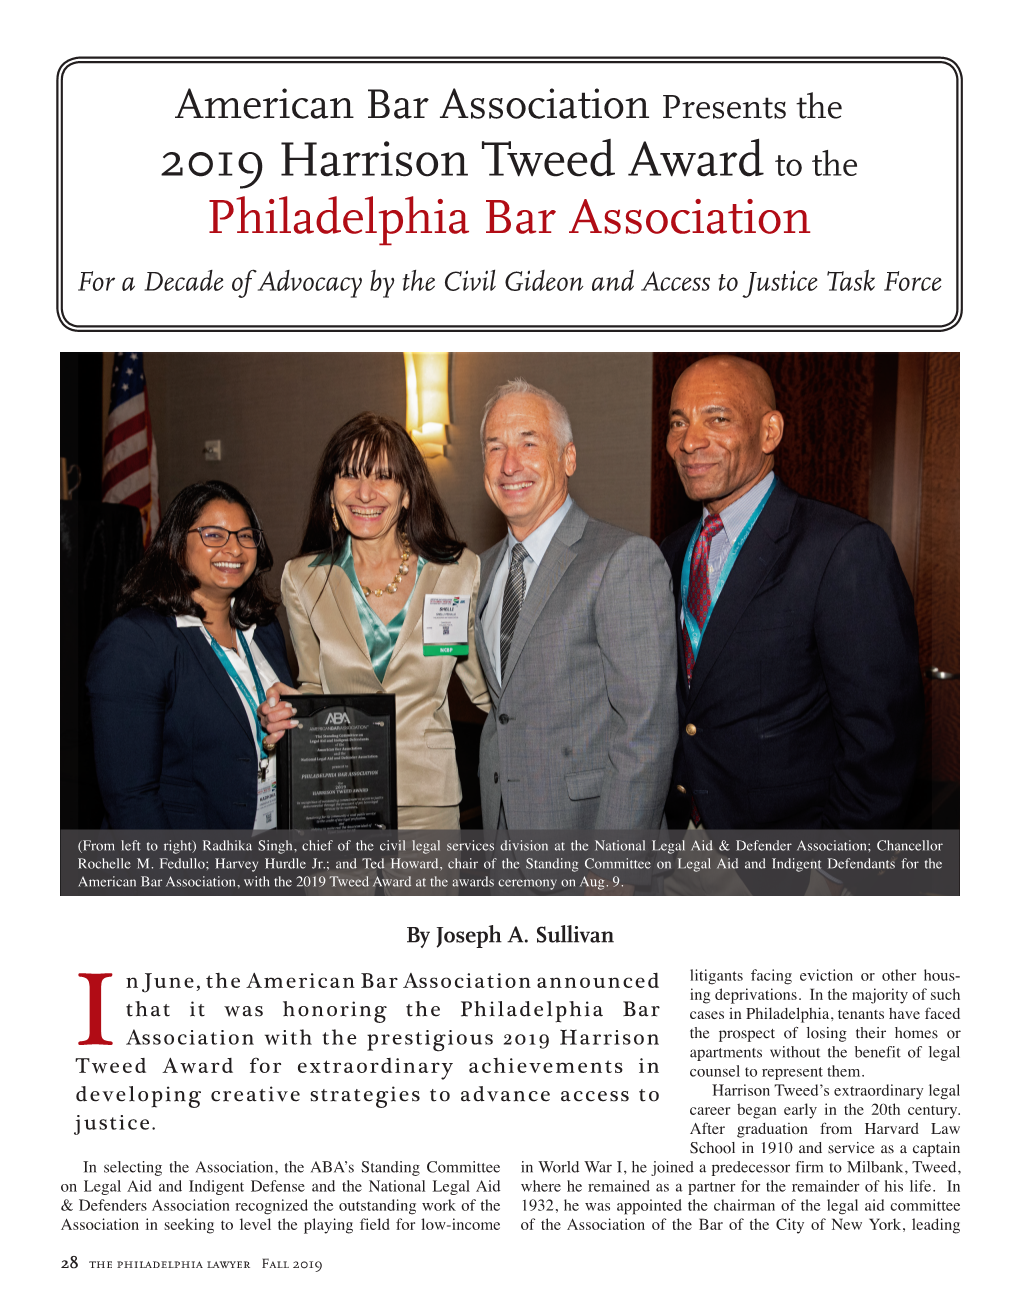 2019 Harrison Tweed Award to the Philadelphia Bar Association for a Decade of Advocacy by the Civil Gideon and Access to Justice Task Force